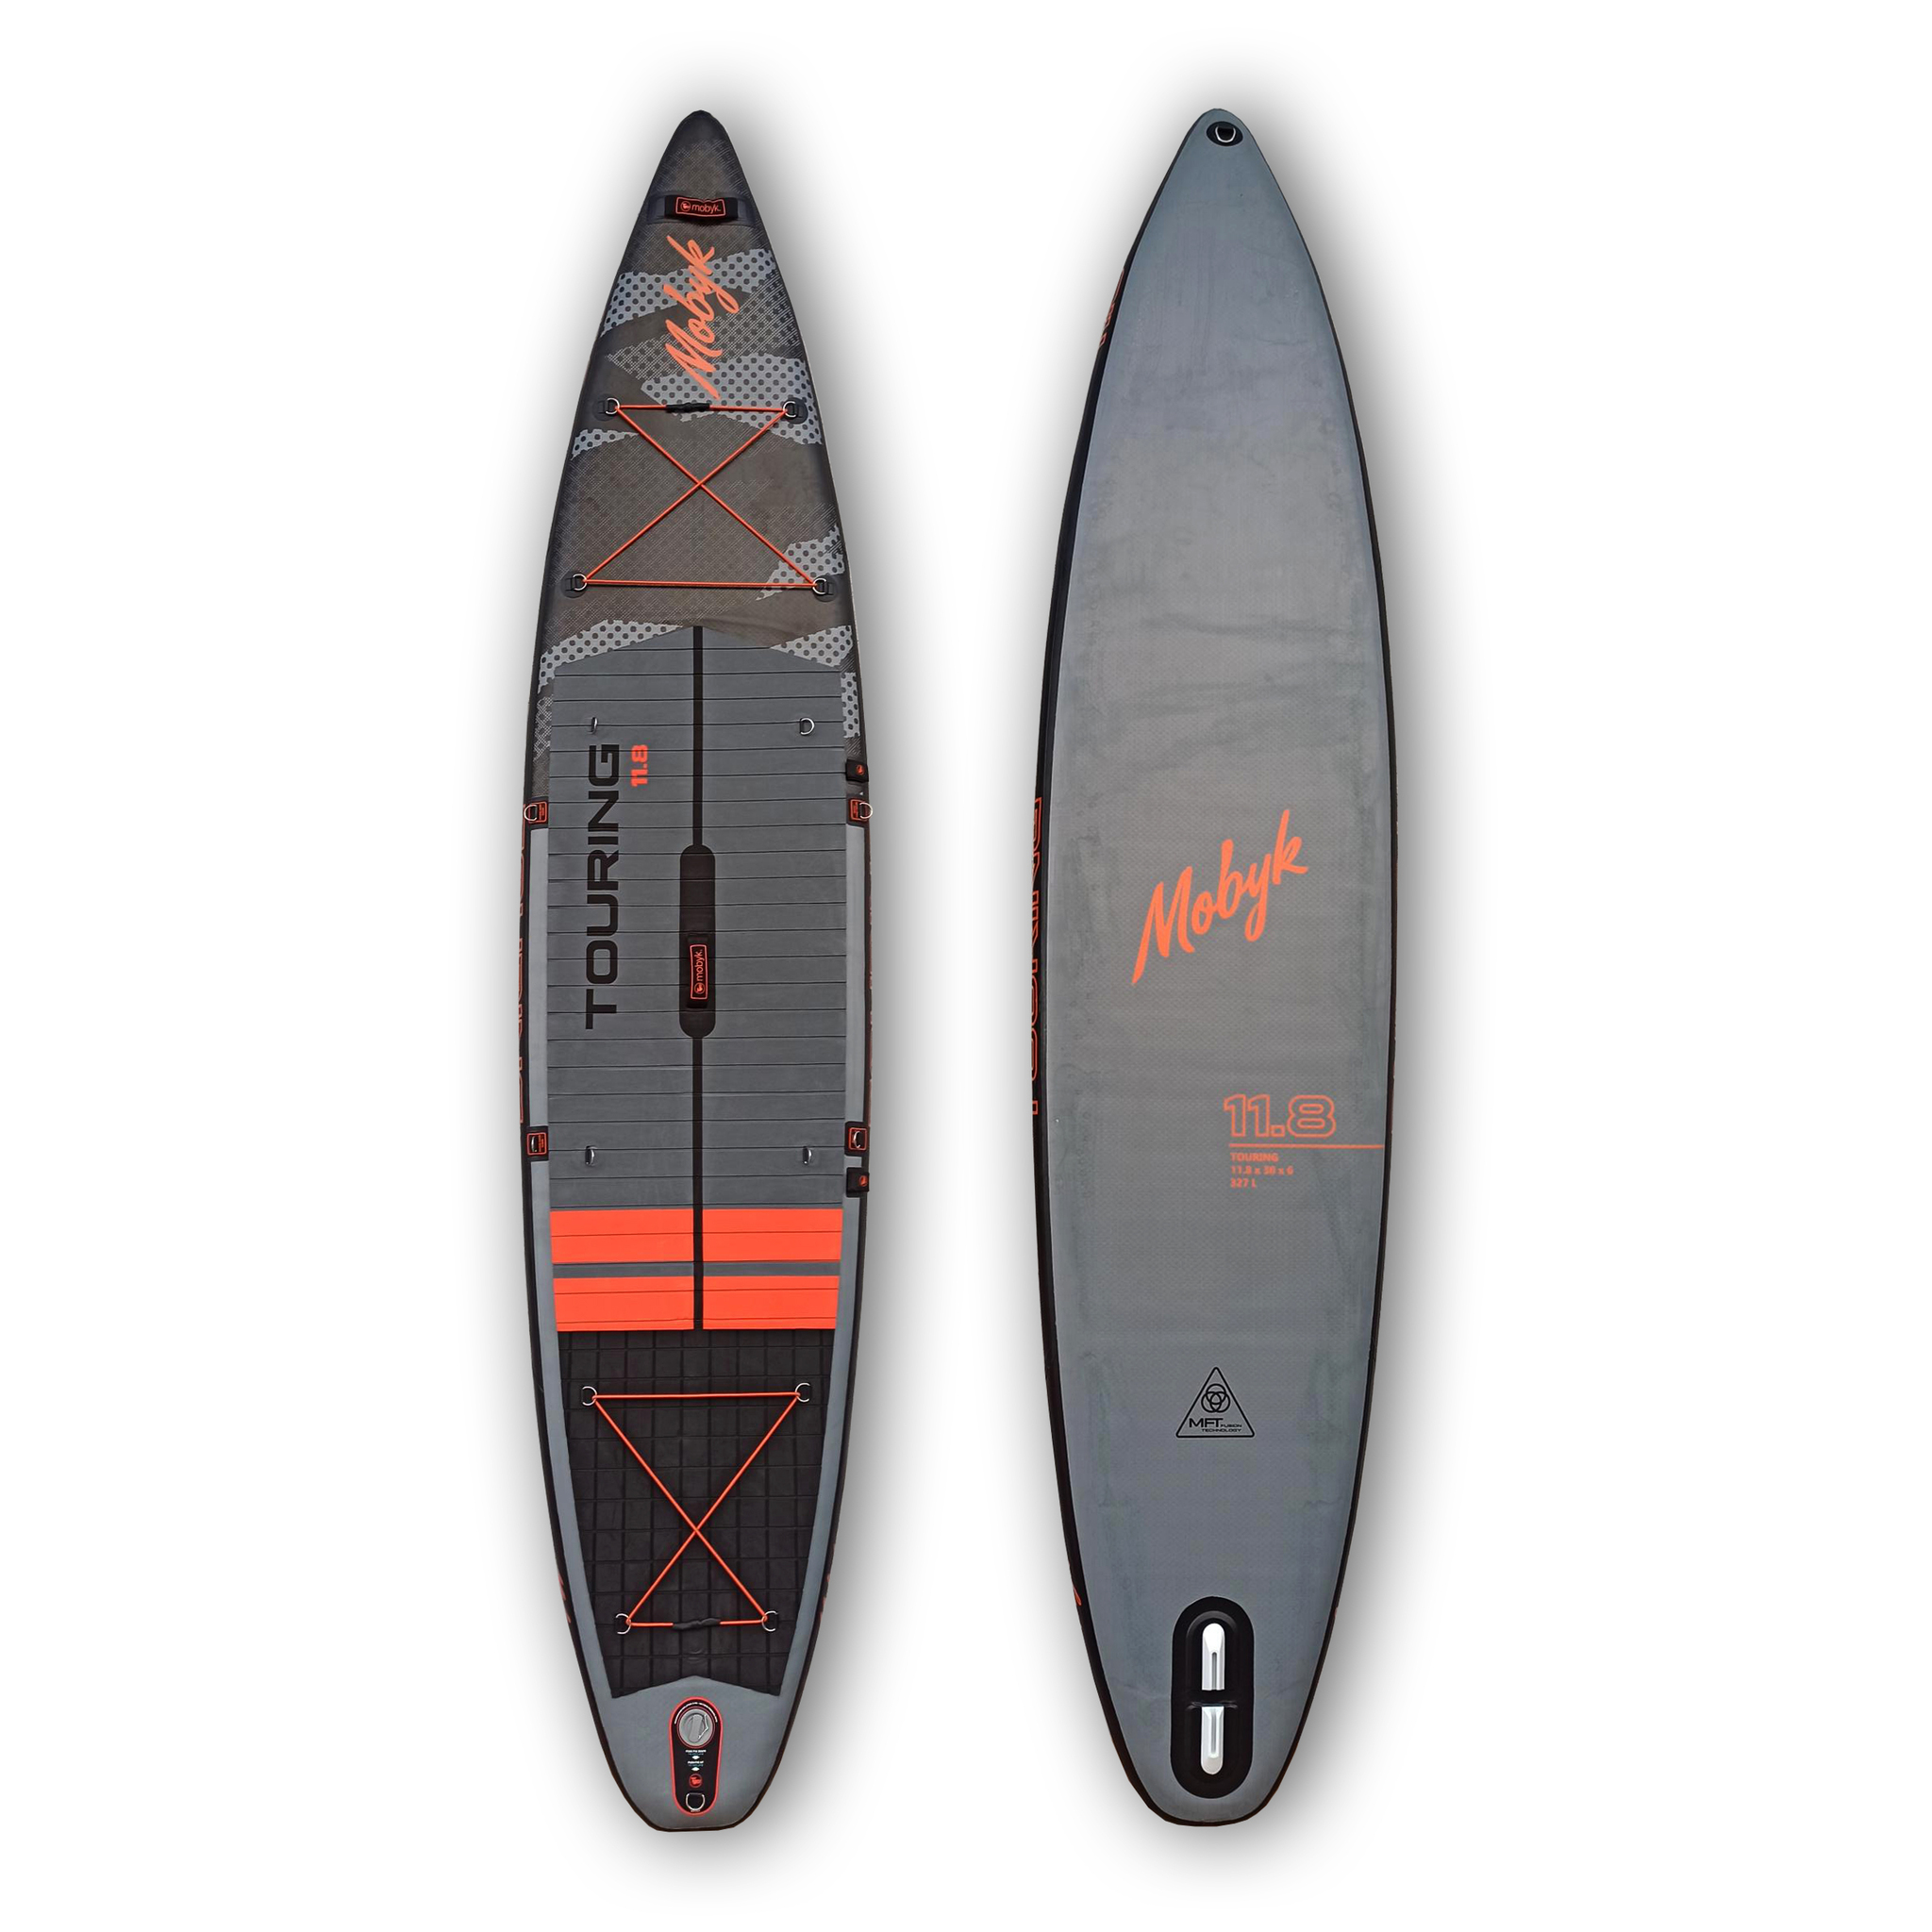 Mobyk ISUP Fusion Camo TOURING - Board Size : 11'8 PSI 18-25